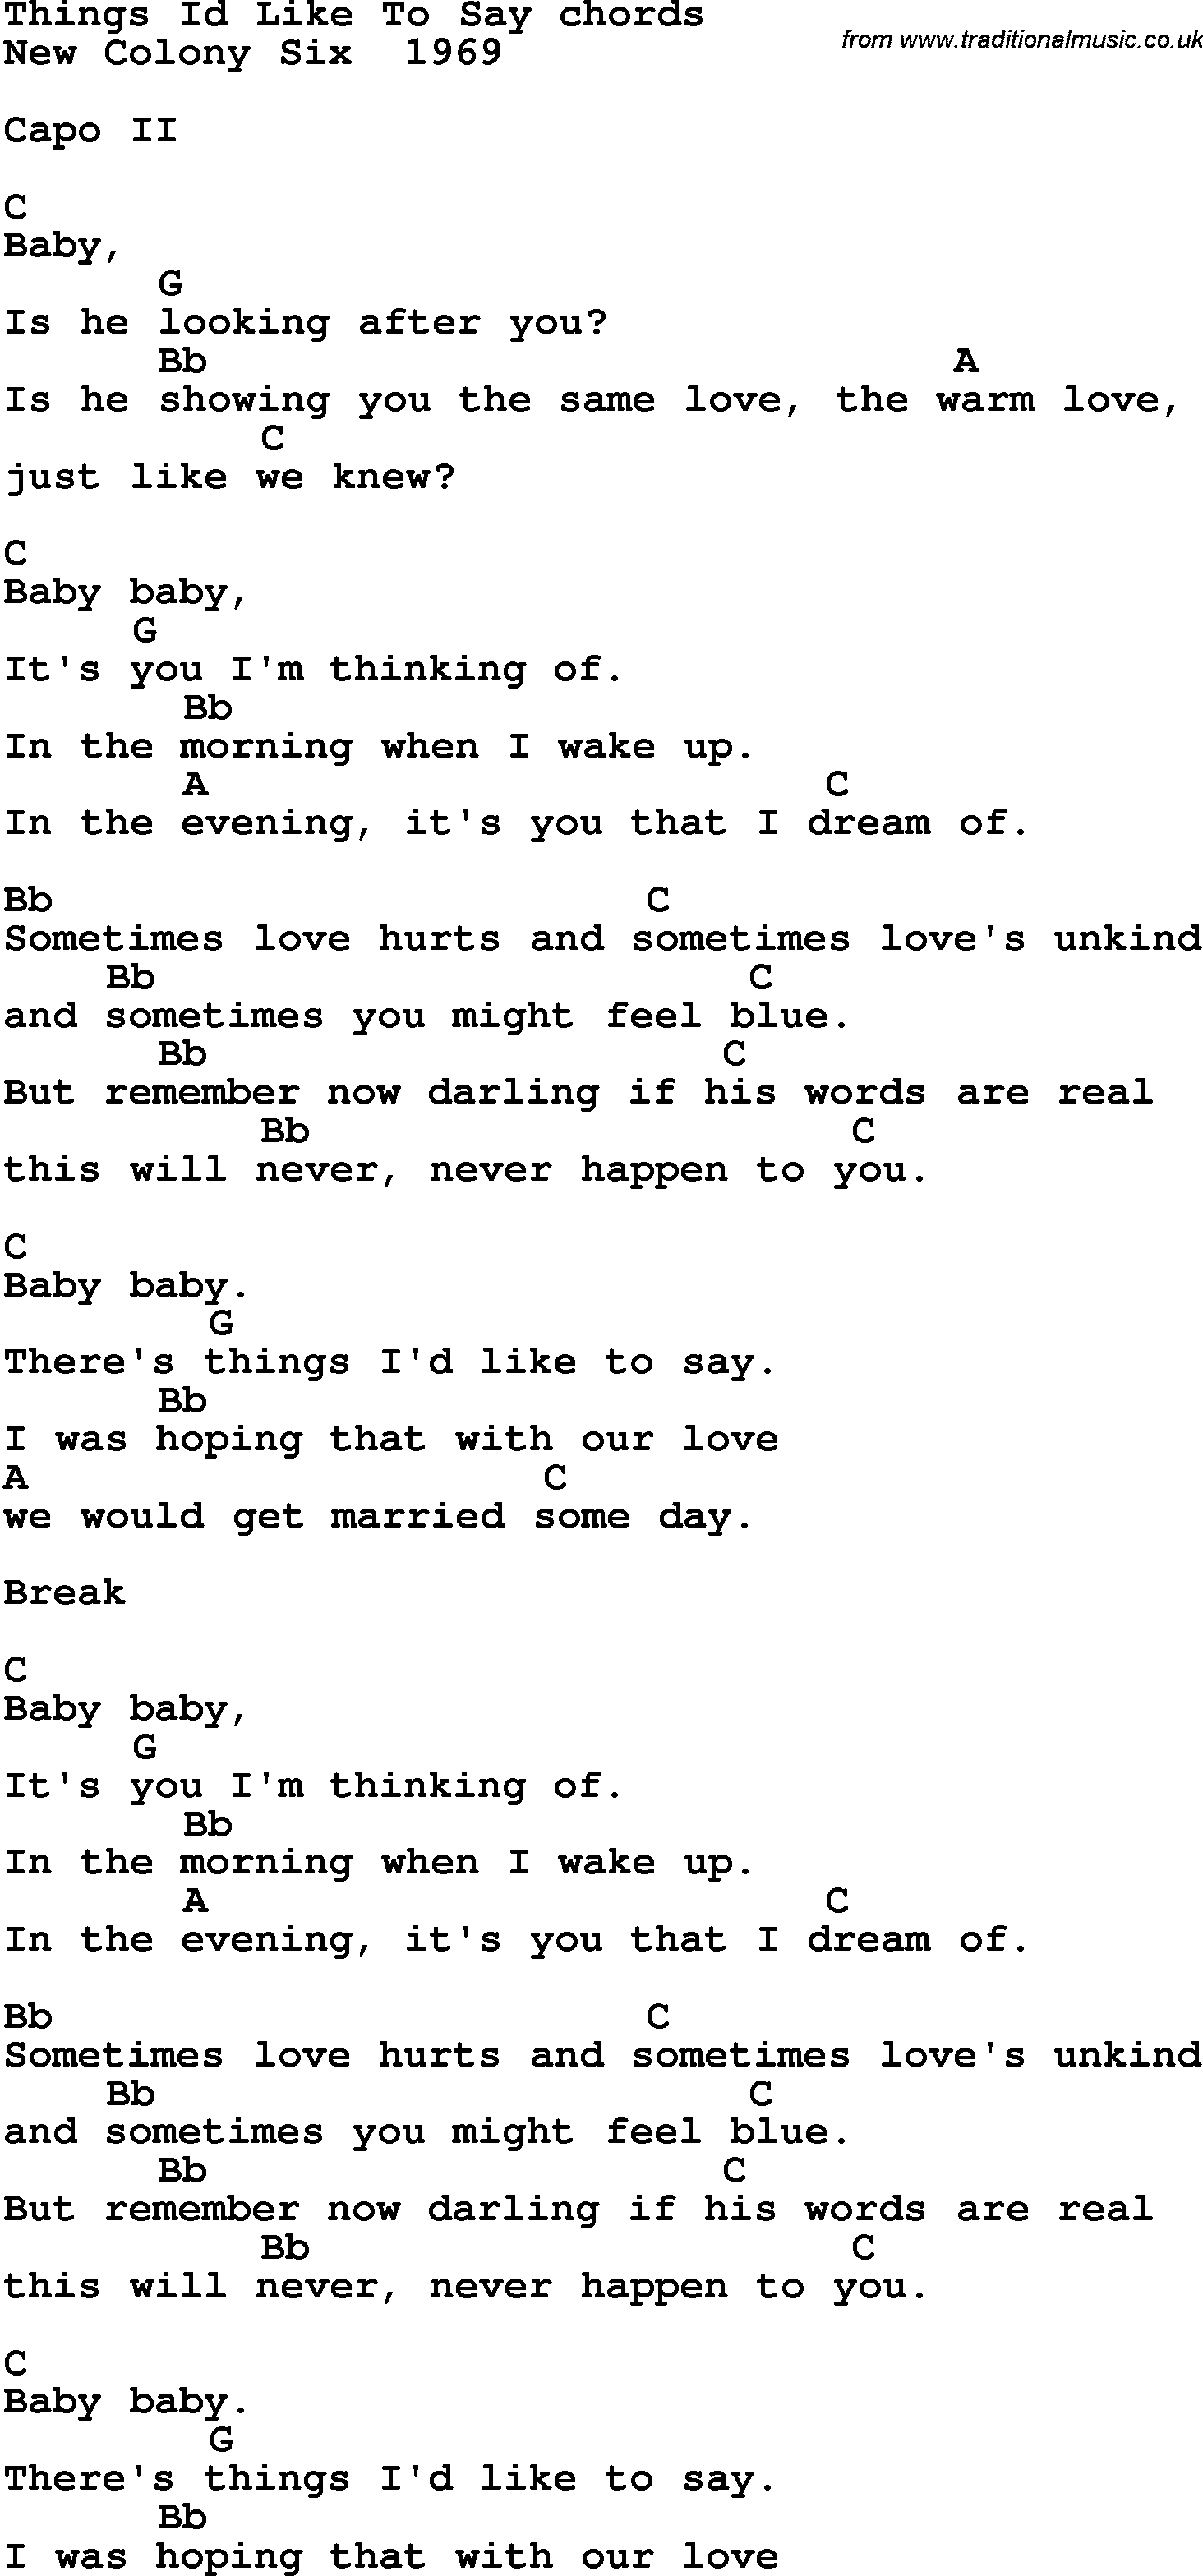 Song Lyrics with guitar chords for Things I'd Like To Say